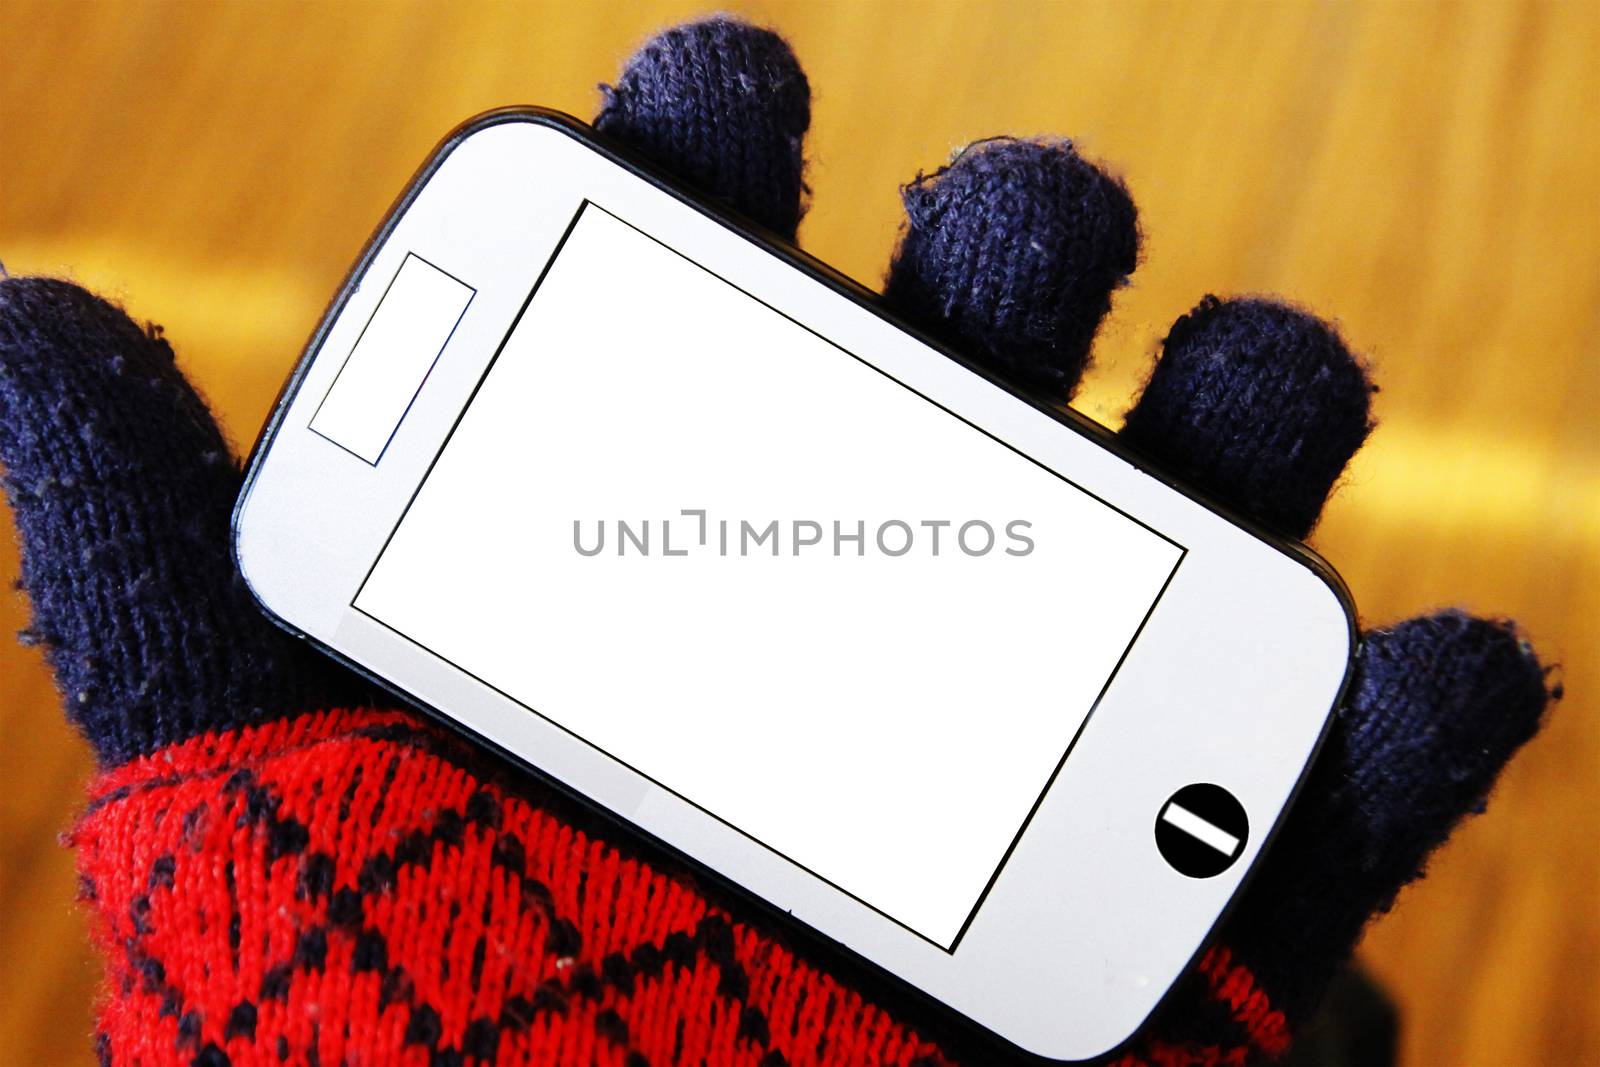 Hand with red glove holding the smart phone